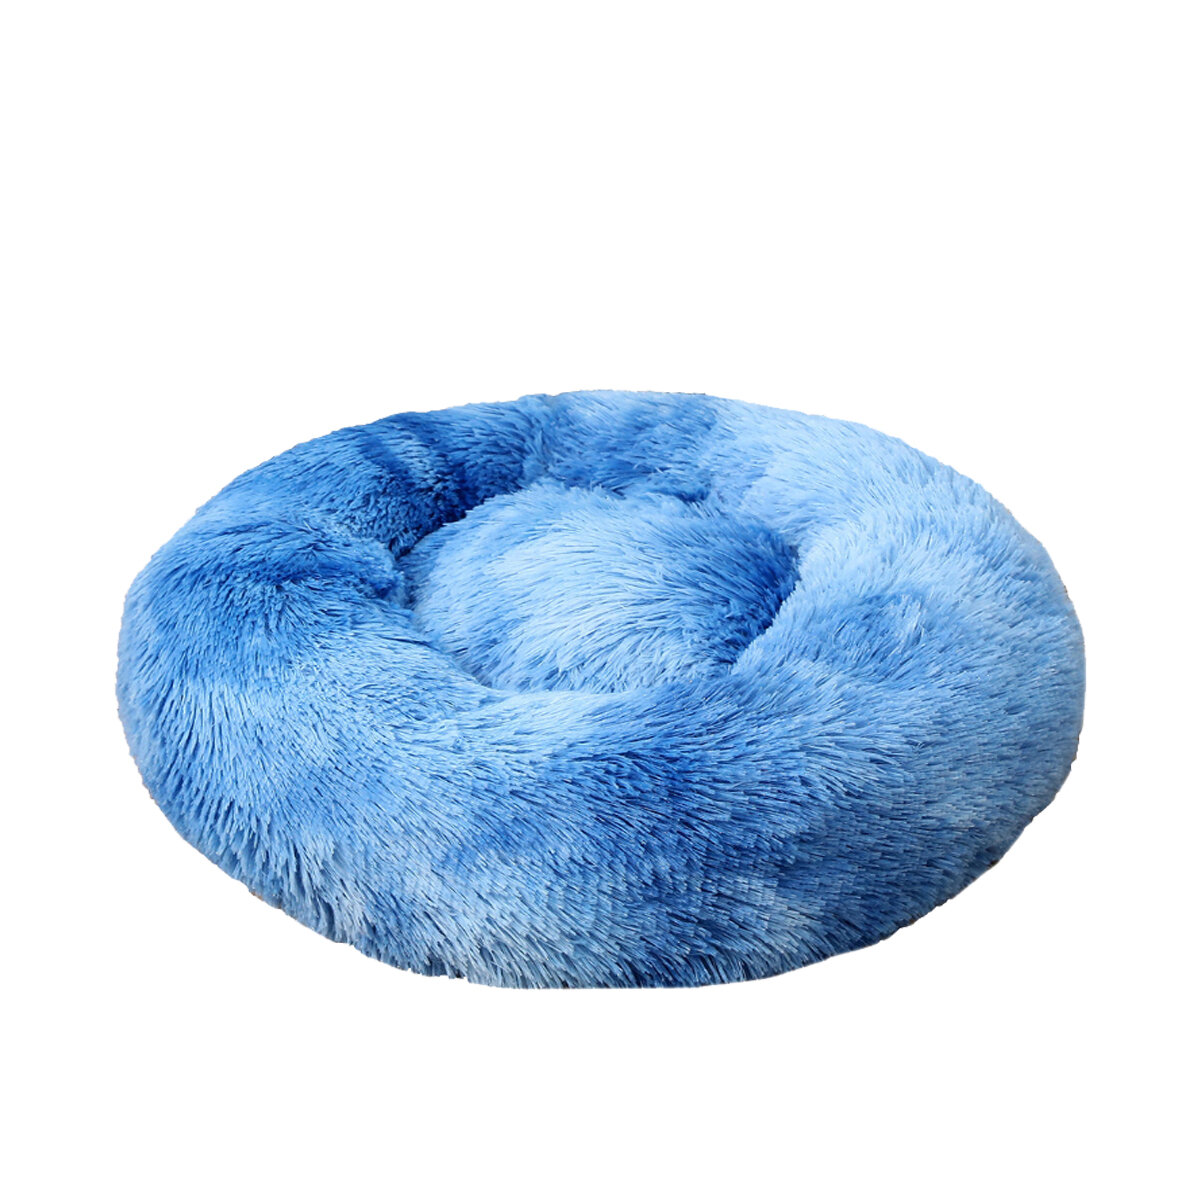 60cm Plush Fluffy Soft Pet Bed for Cats & Dogs Calming Bed Pad Soft Mat Home-heyidear